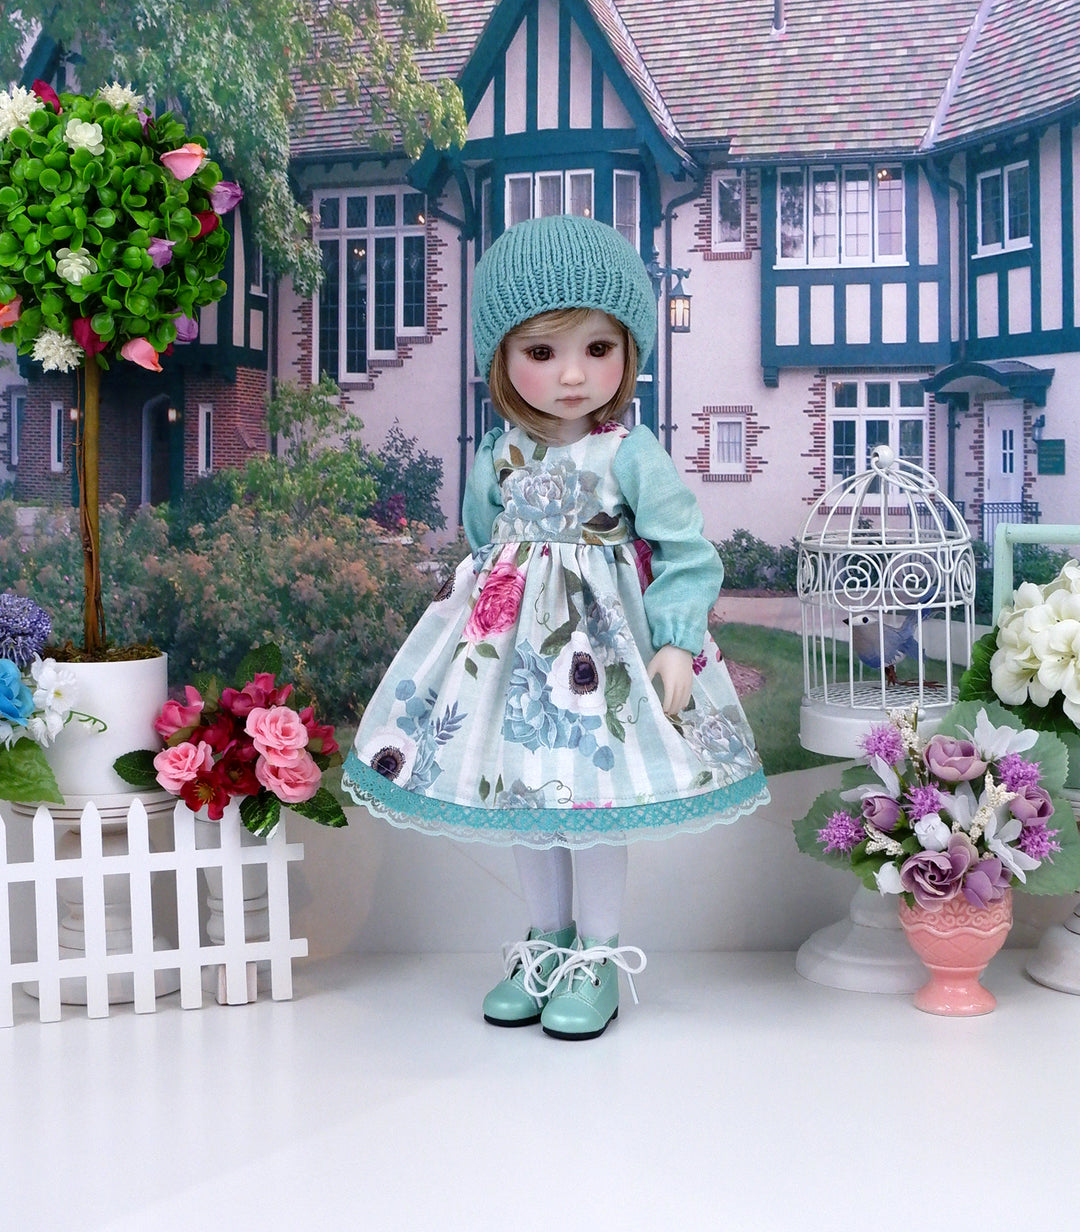 Blooming Agave - dress ensemble with boots for Ruby Red Fashion Friends doll